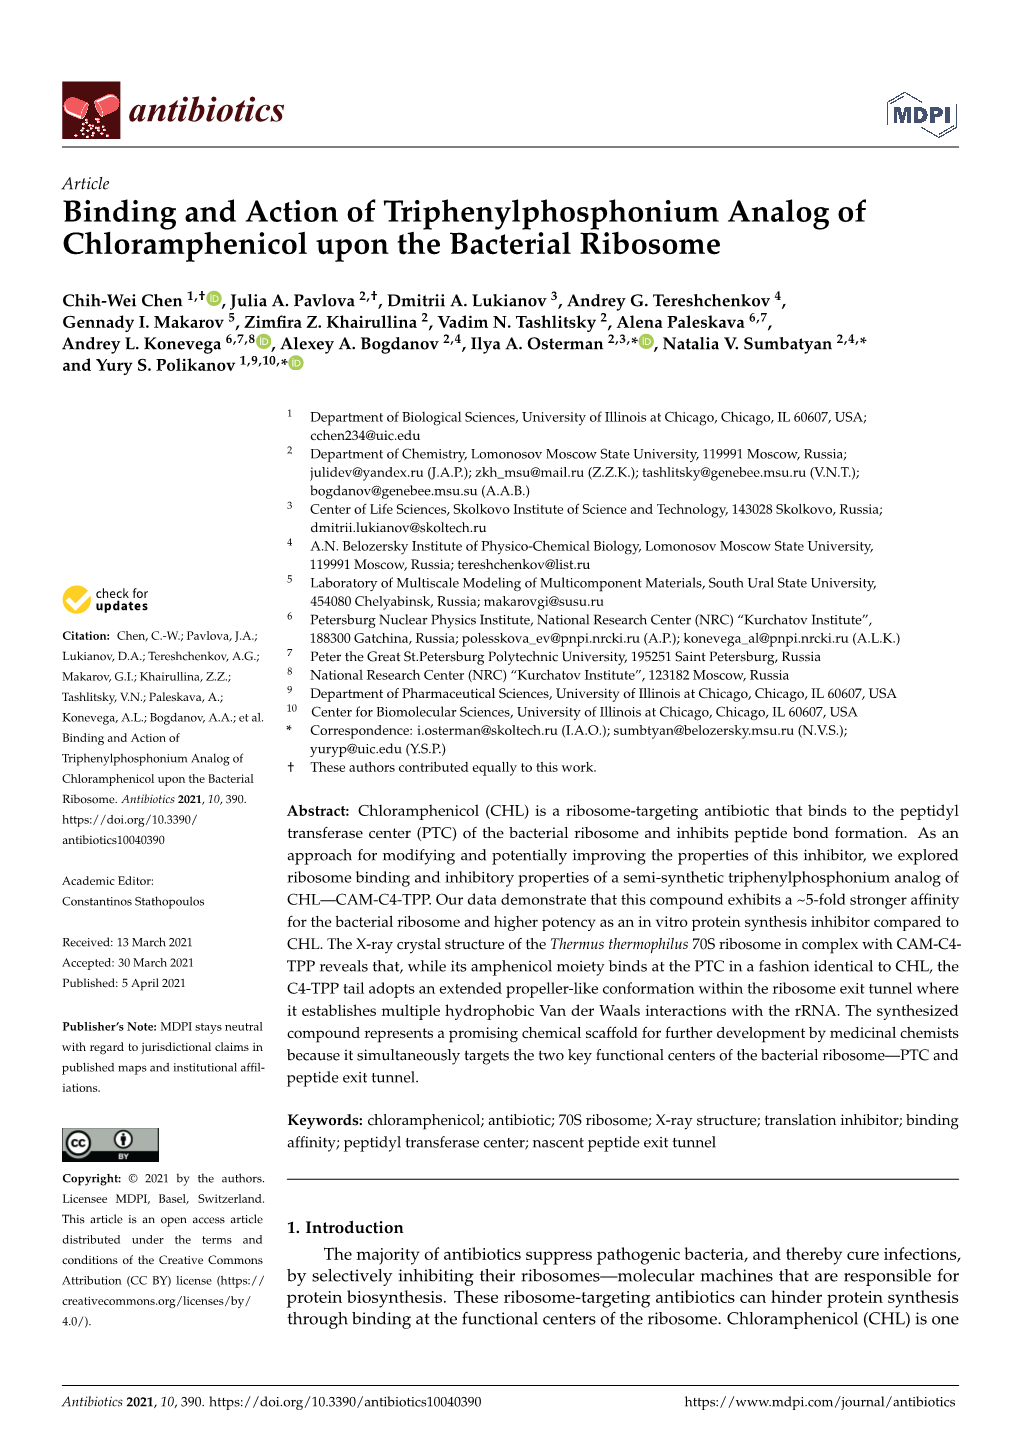 Binding and Action of Triphenylphosphonium Analog of Chloramphenicol Upon the Bacterial Ribosome